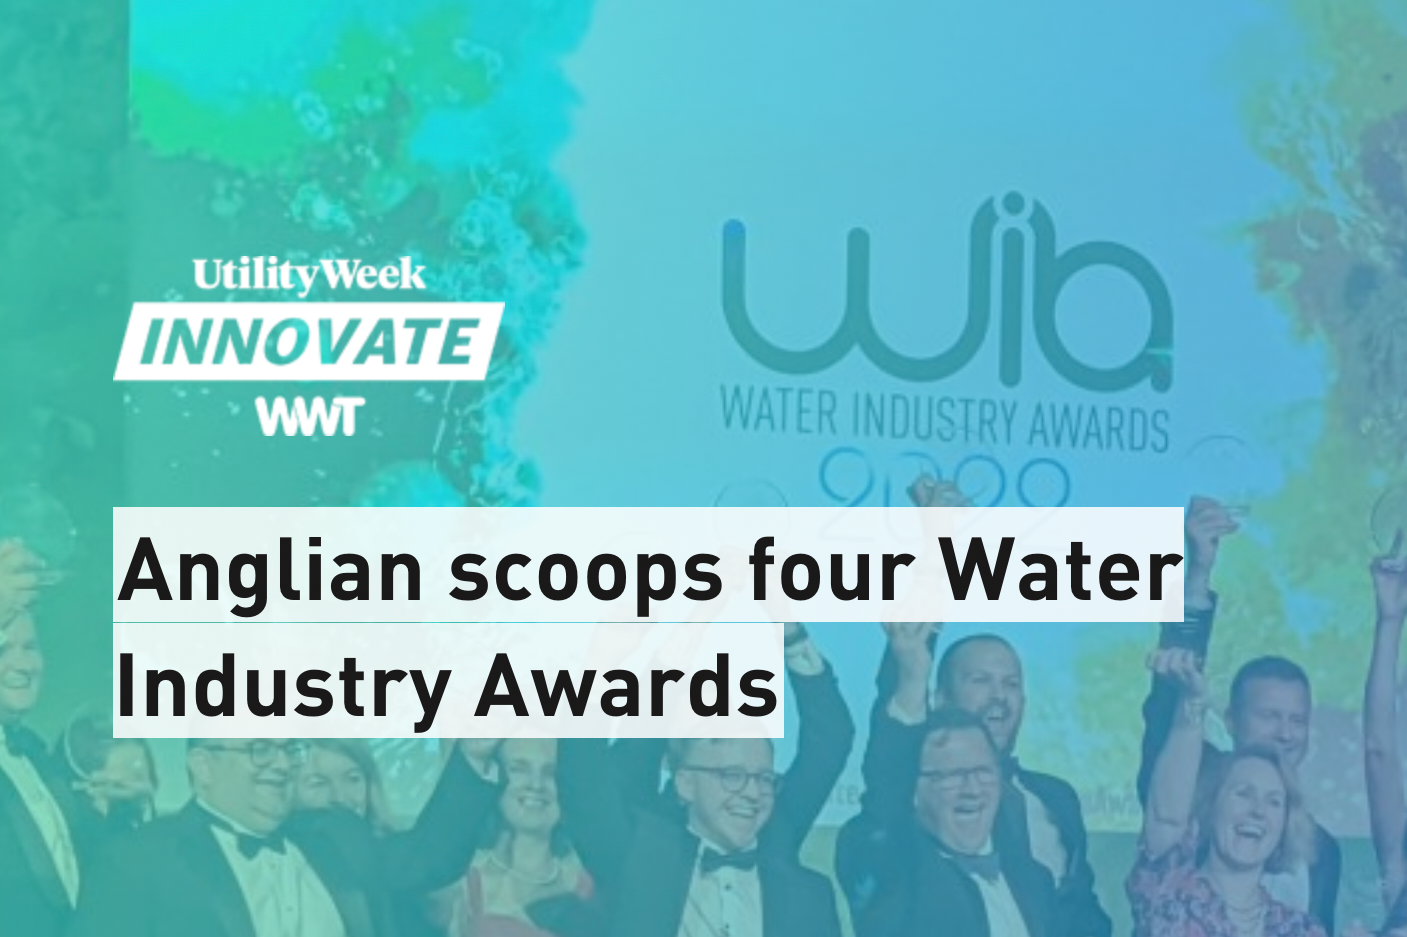 Anglian scoops four Water Industry Awards - Utility Week